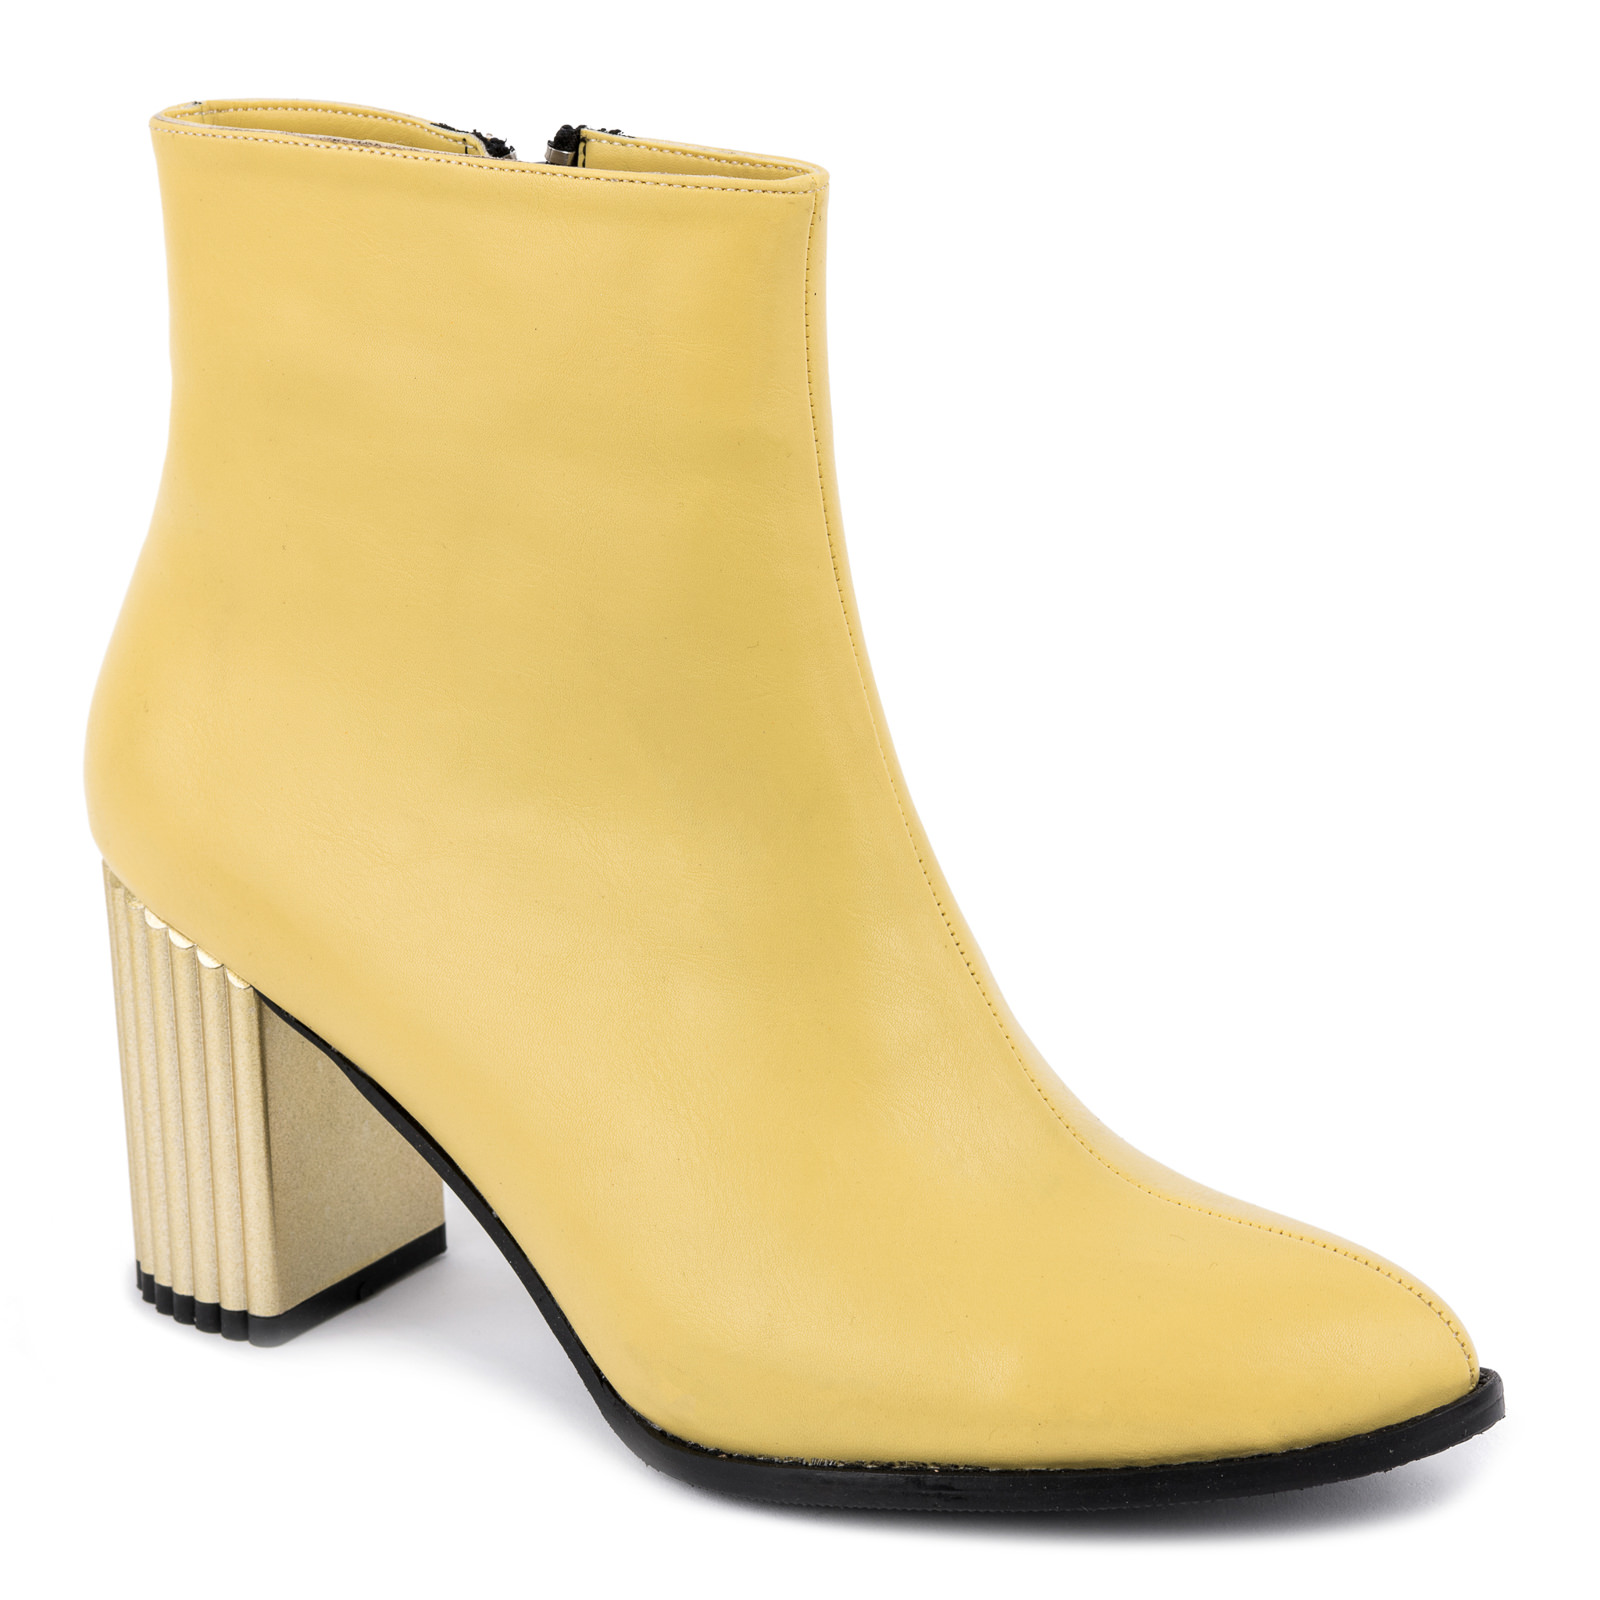 ANKLE BOOTS WITH GOLDEN BLOCK HEEL - YELLOW